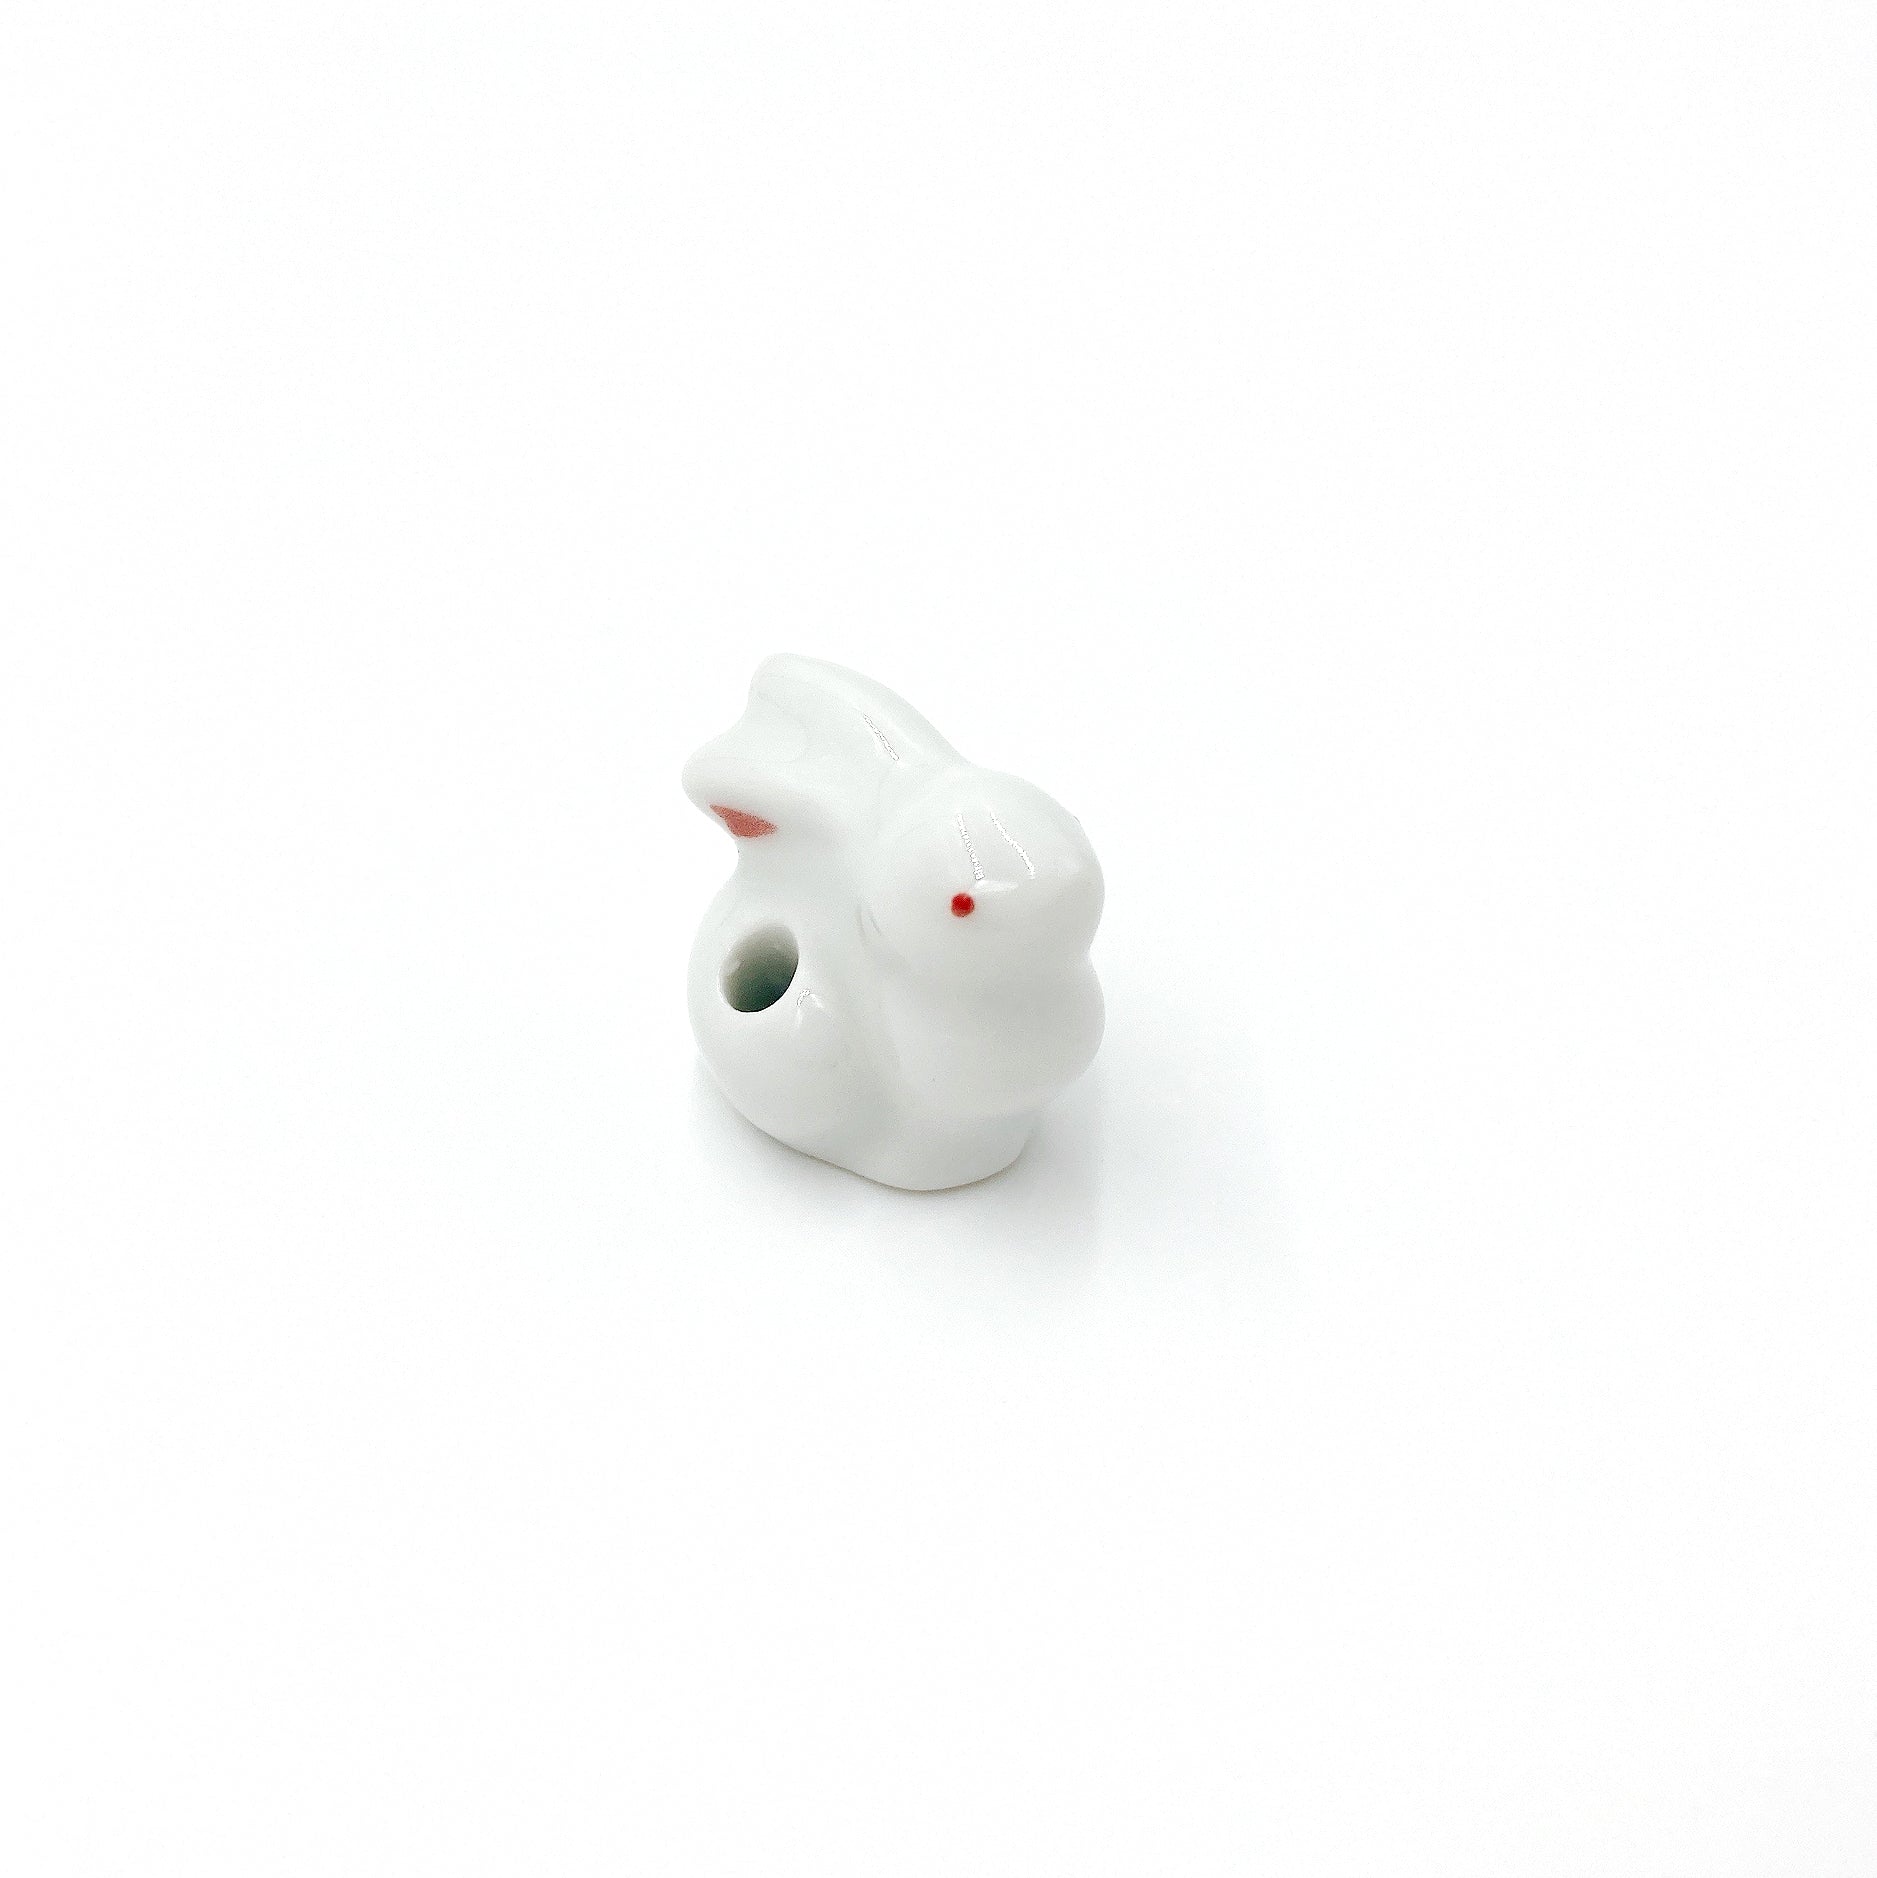 close up angled view of pink and white ceramic Kyūkyodō Incense Set bunny incense stick holder right side